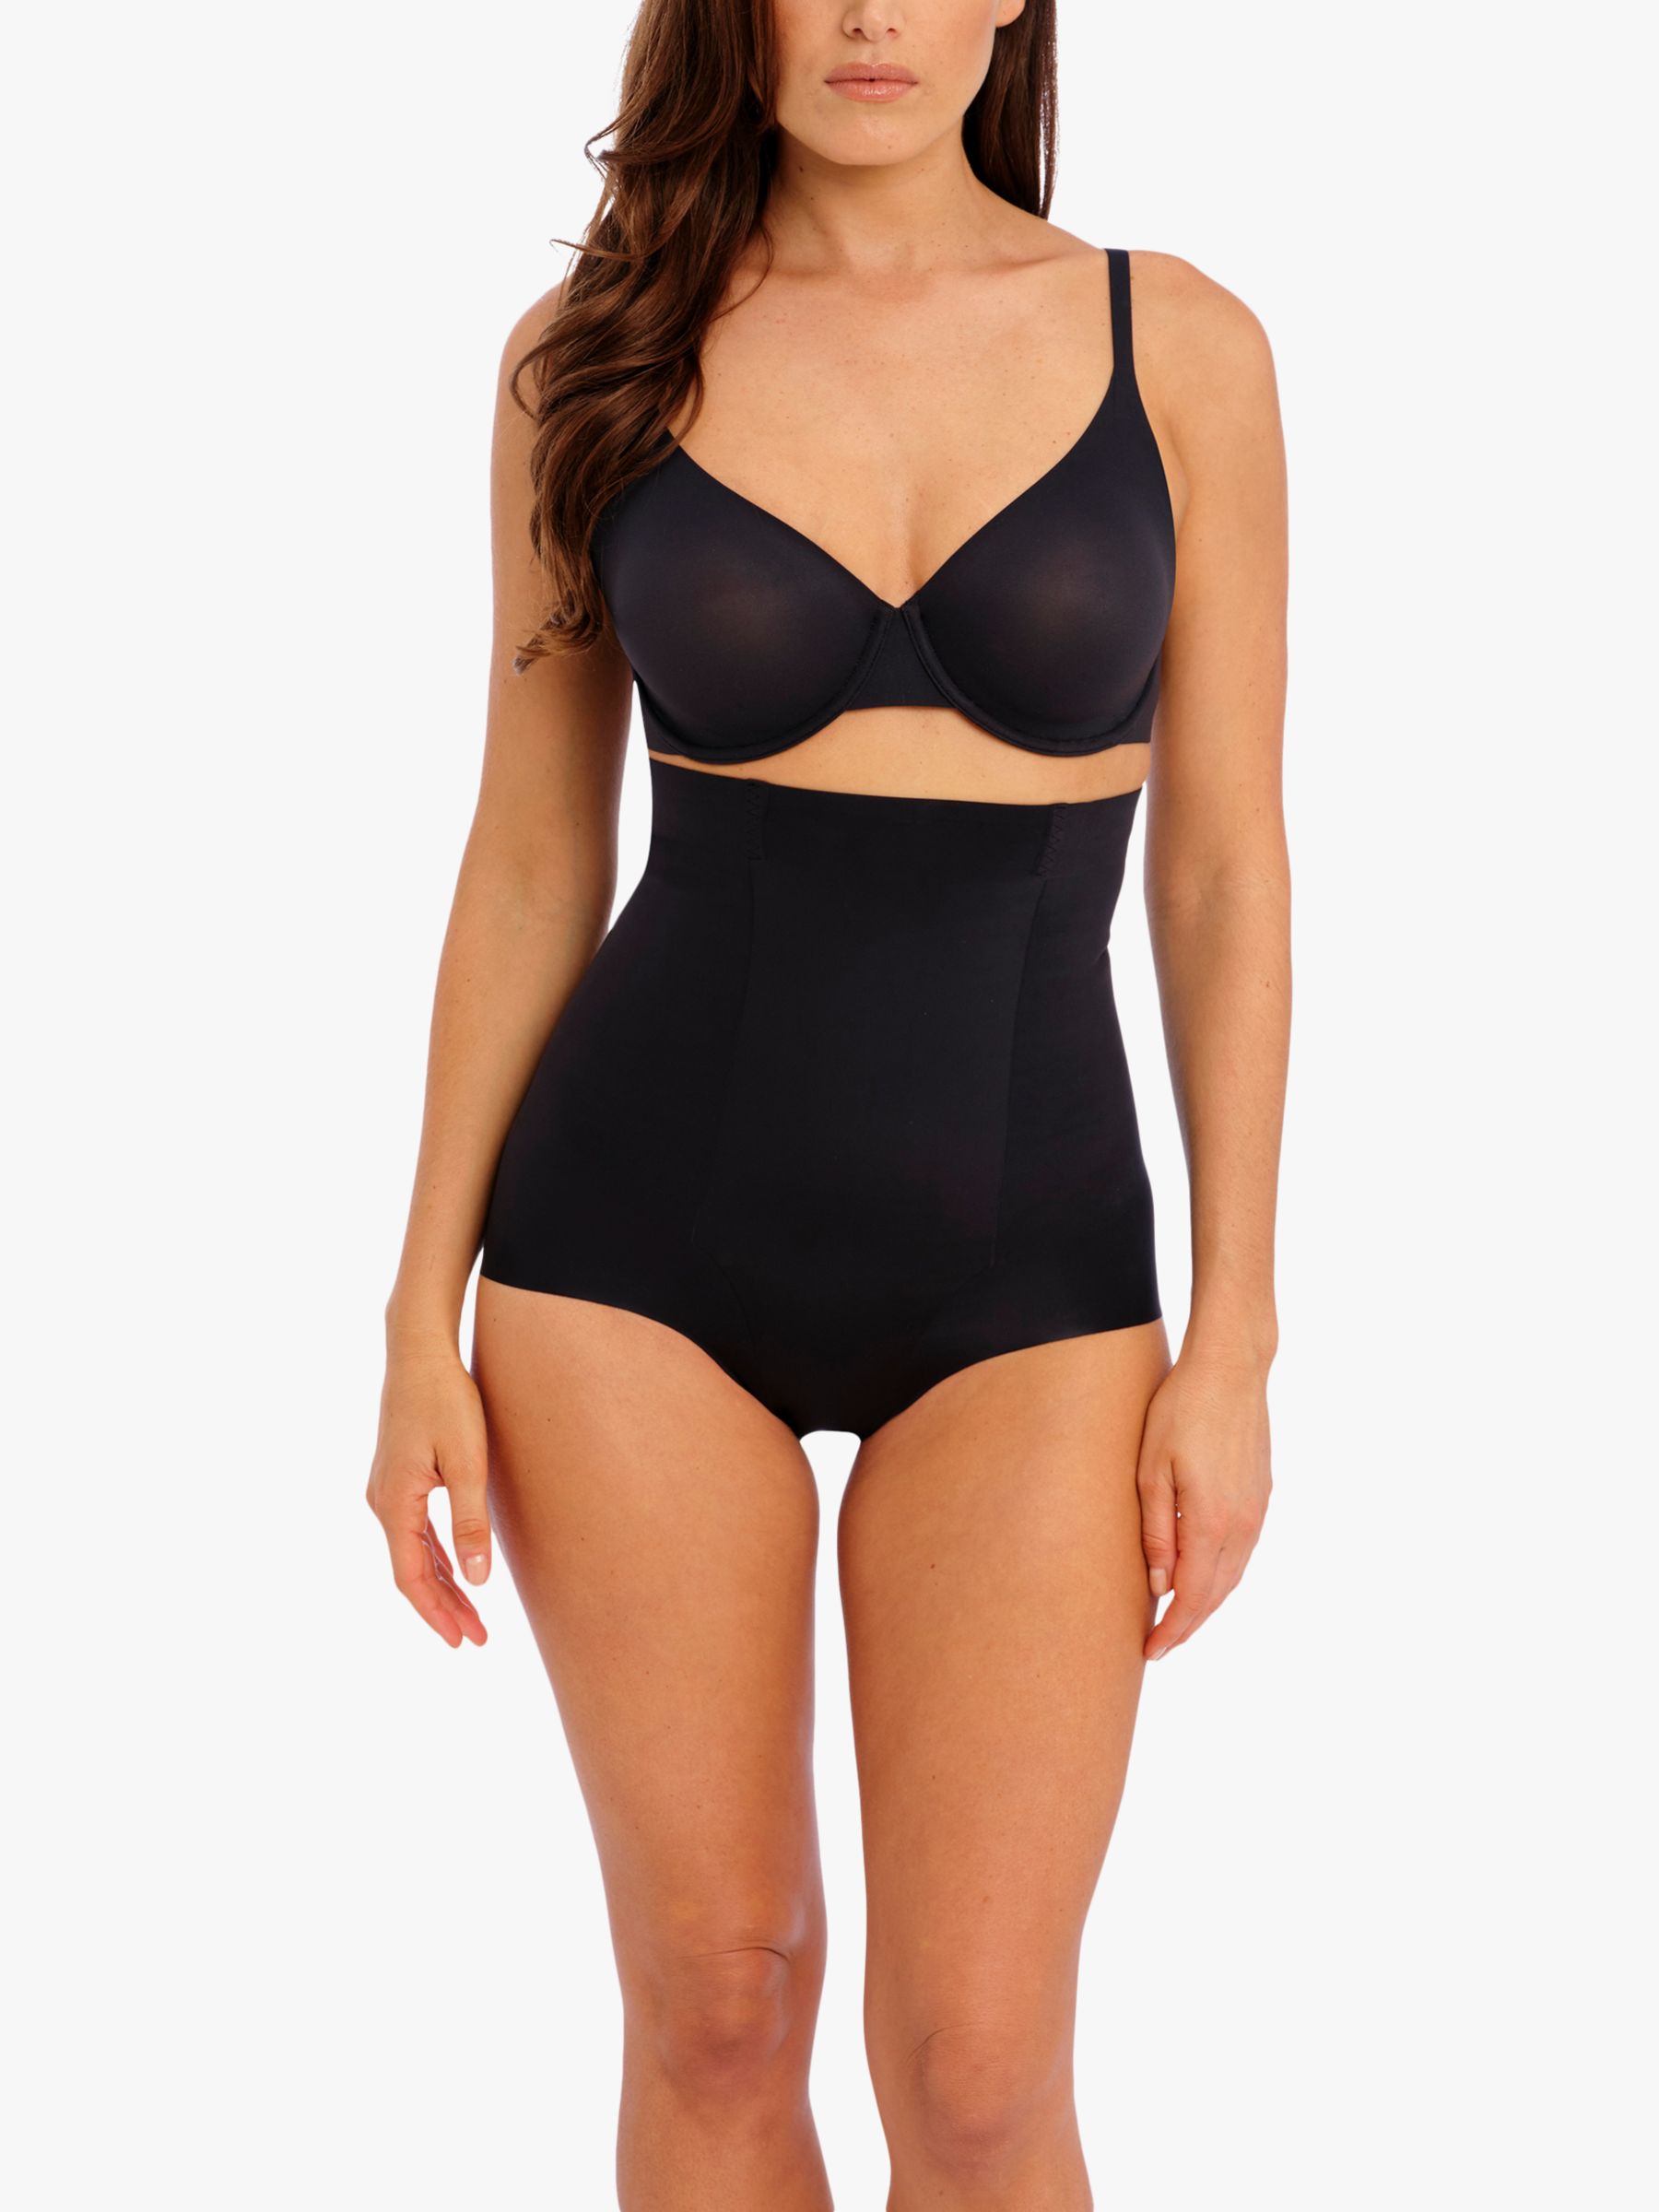 Find Cheap, Fashionable and Slimming slimming high waist control